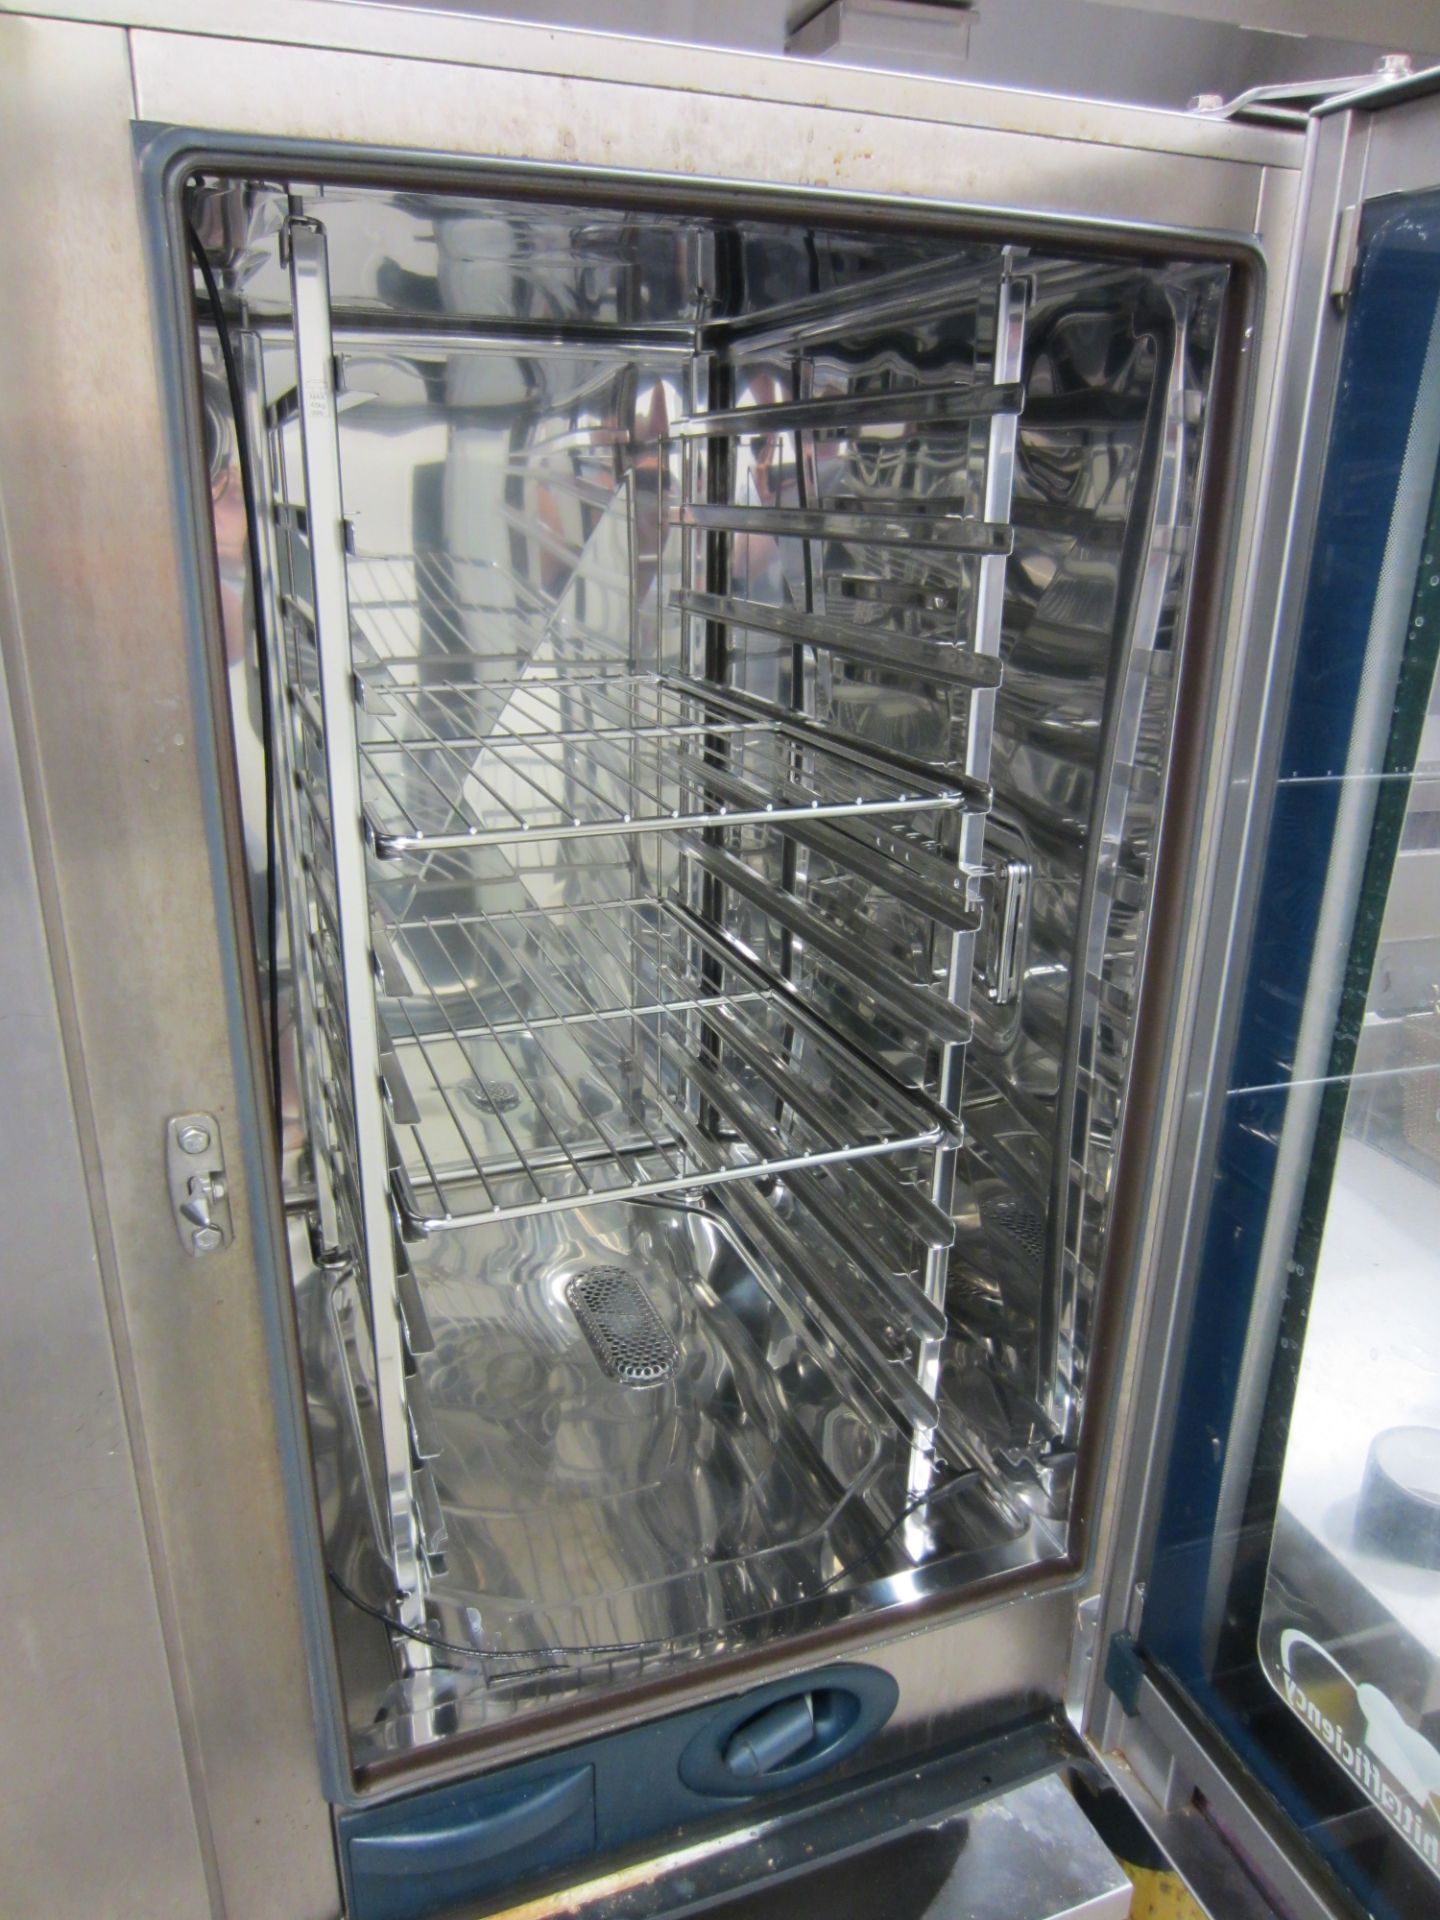 Rational Combi Oven SCC-WE 101, Very Good Condition - Image 2 of 3